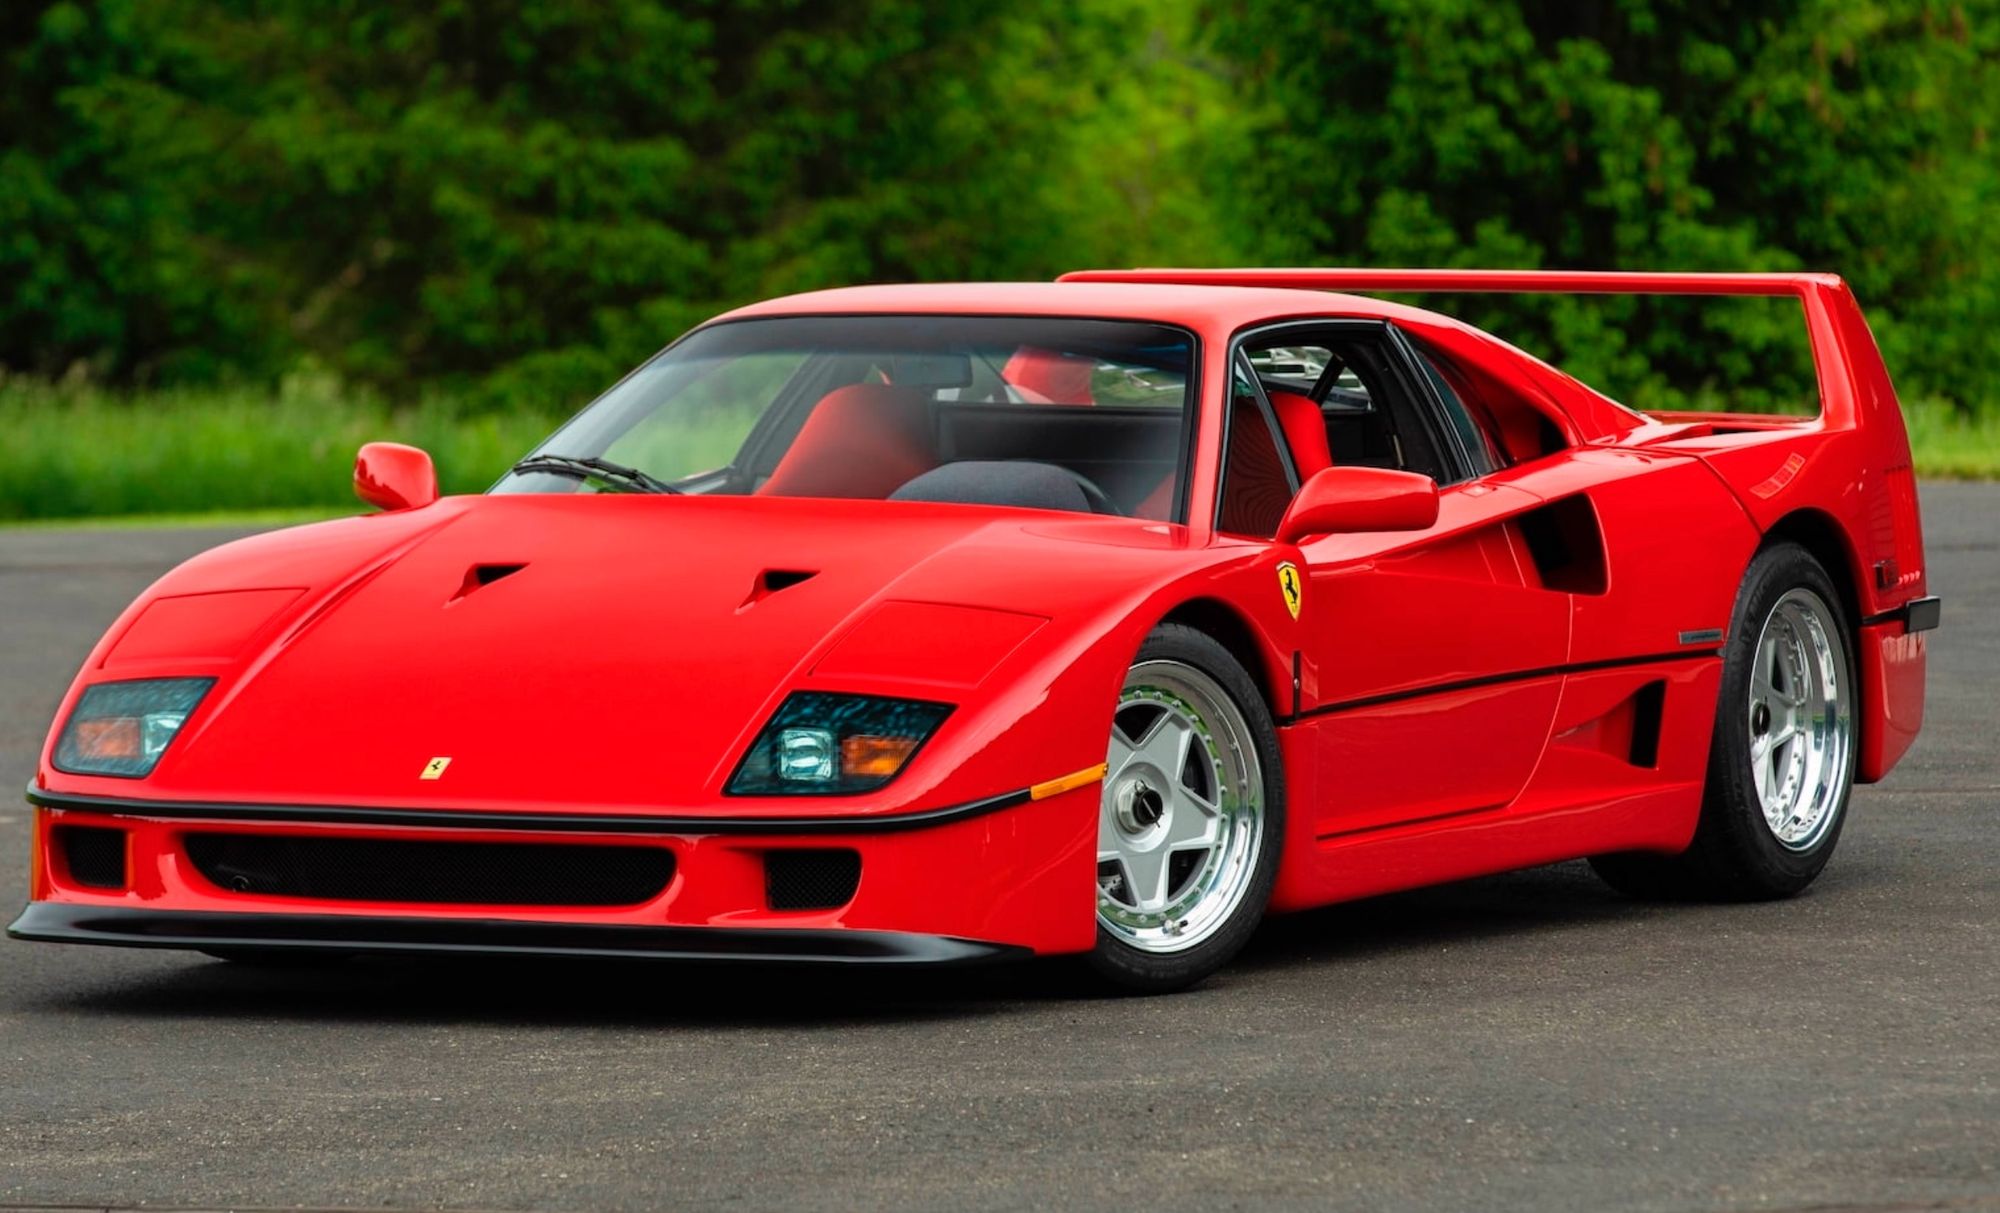 Rare & Desirable F40 Among Many Ferraris on Offer at Mecum